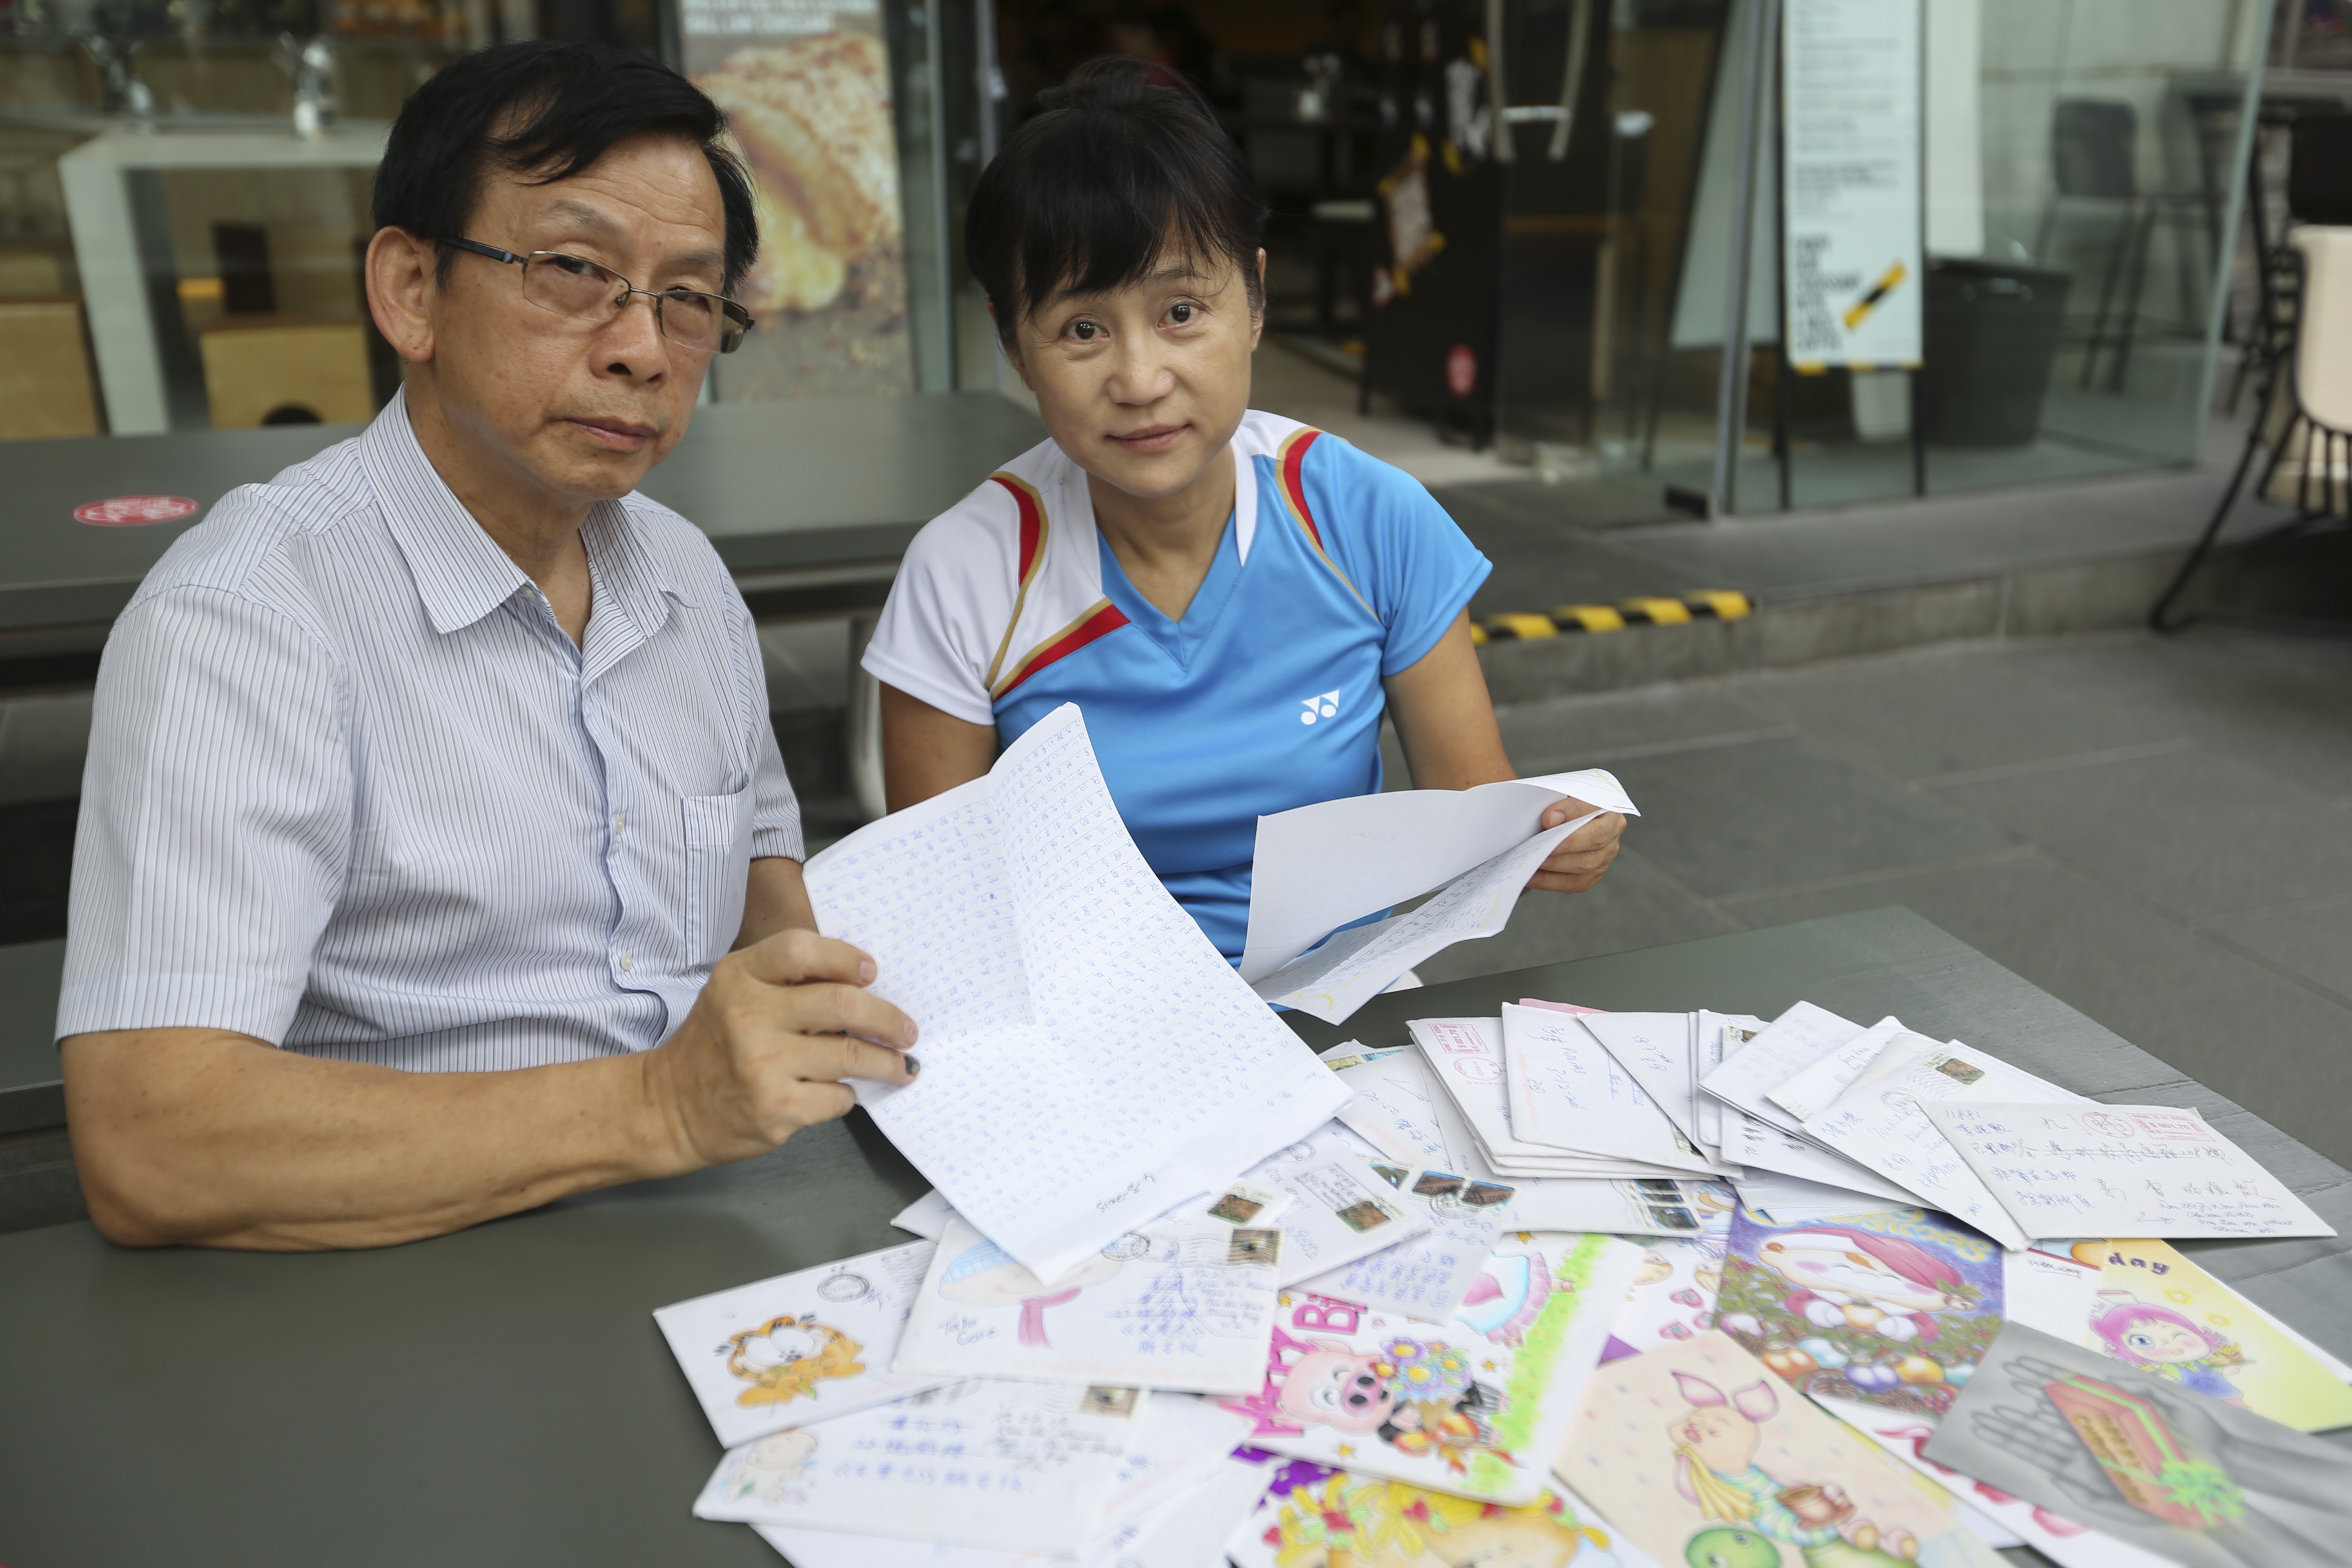 Prisoners’ Friends’ Association president Jack Fung Sun-wah and member of the association Michelle Lui Kit-hing. Lui has been writing to inmates since 2010 and has received about 1,500 letters from prisoners. She currently writes to 15 inmates. Photo: Xiaomei Chen